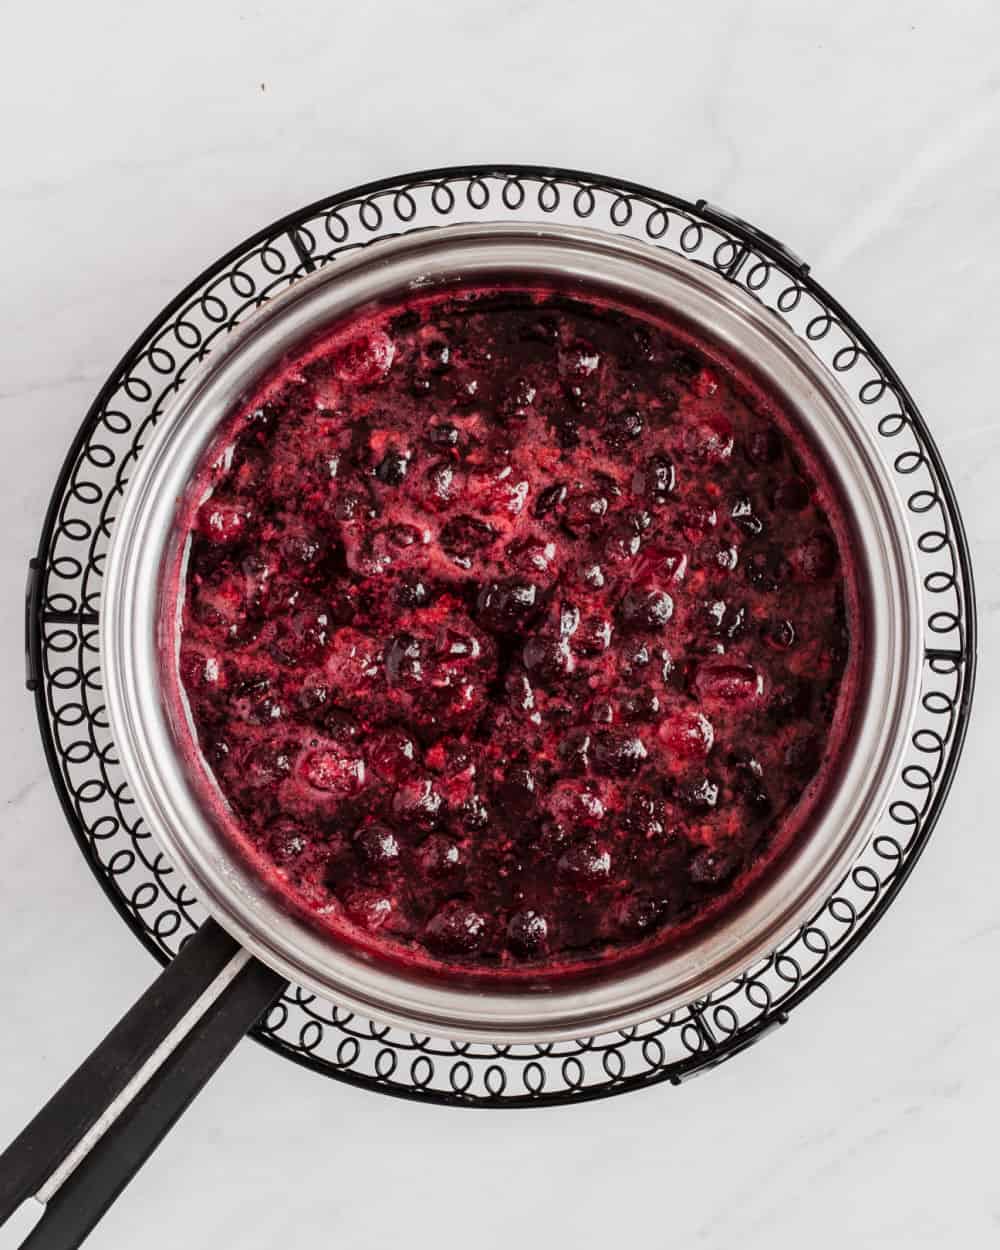 fresh cranberries cooked down to a sauce in saucepan.